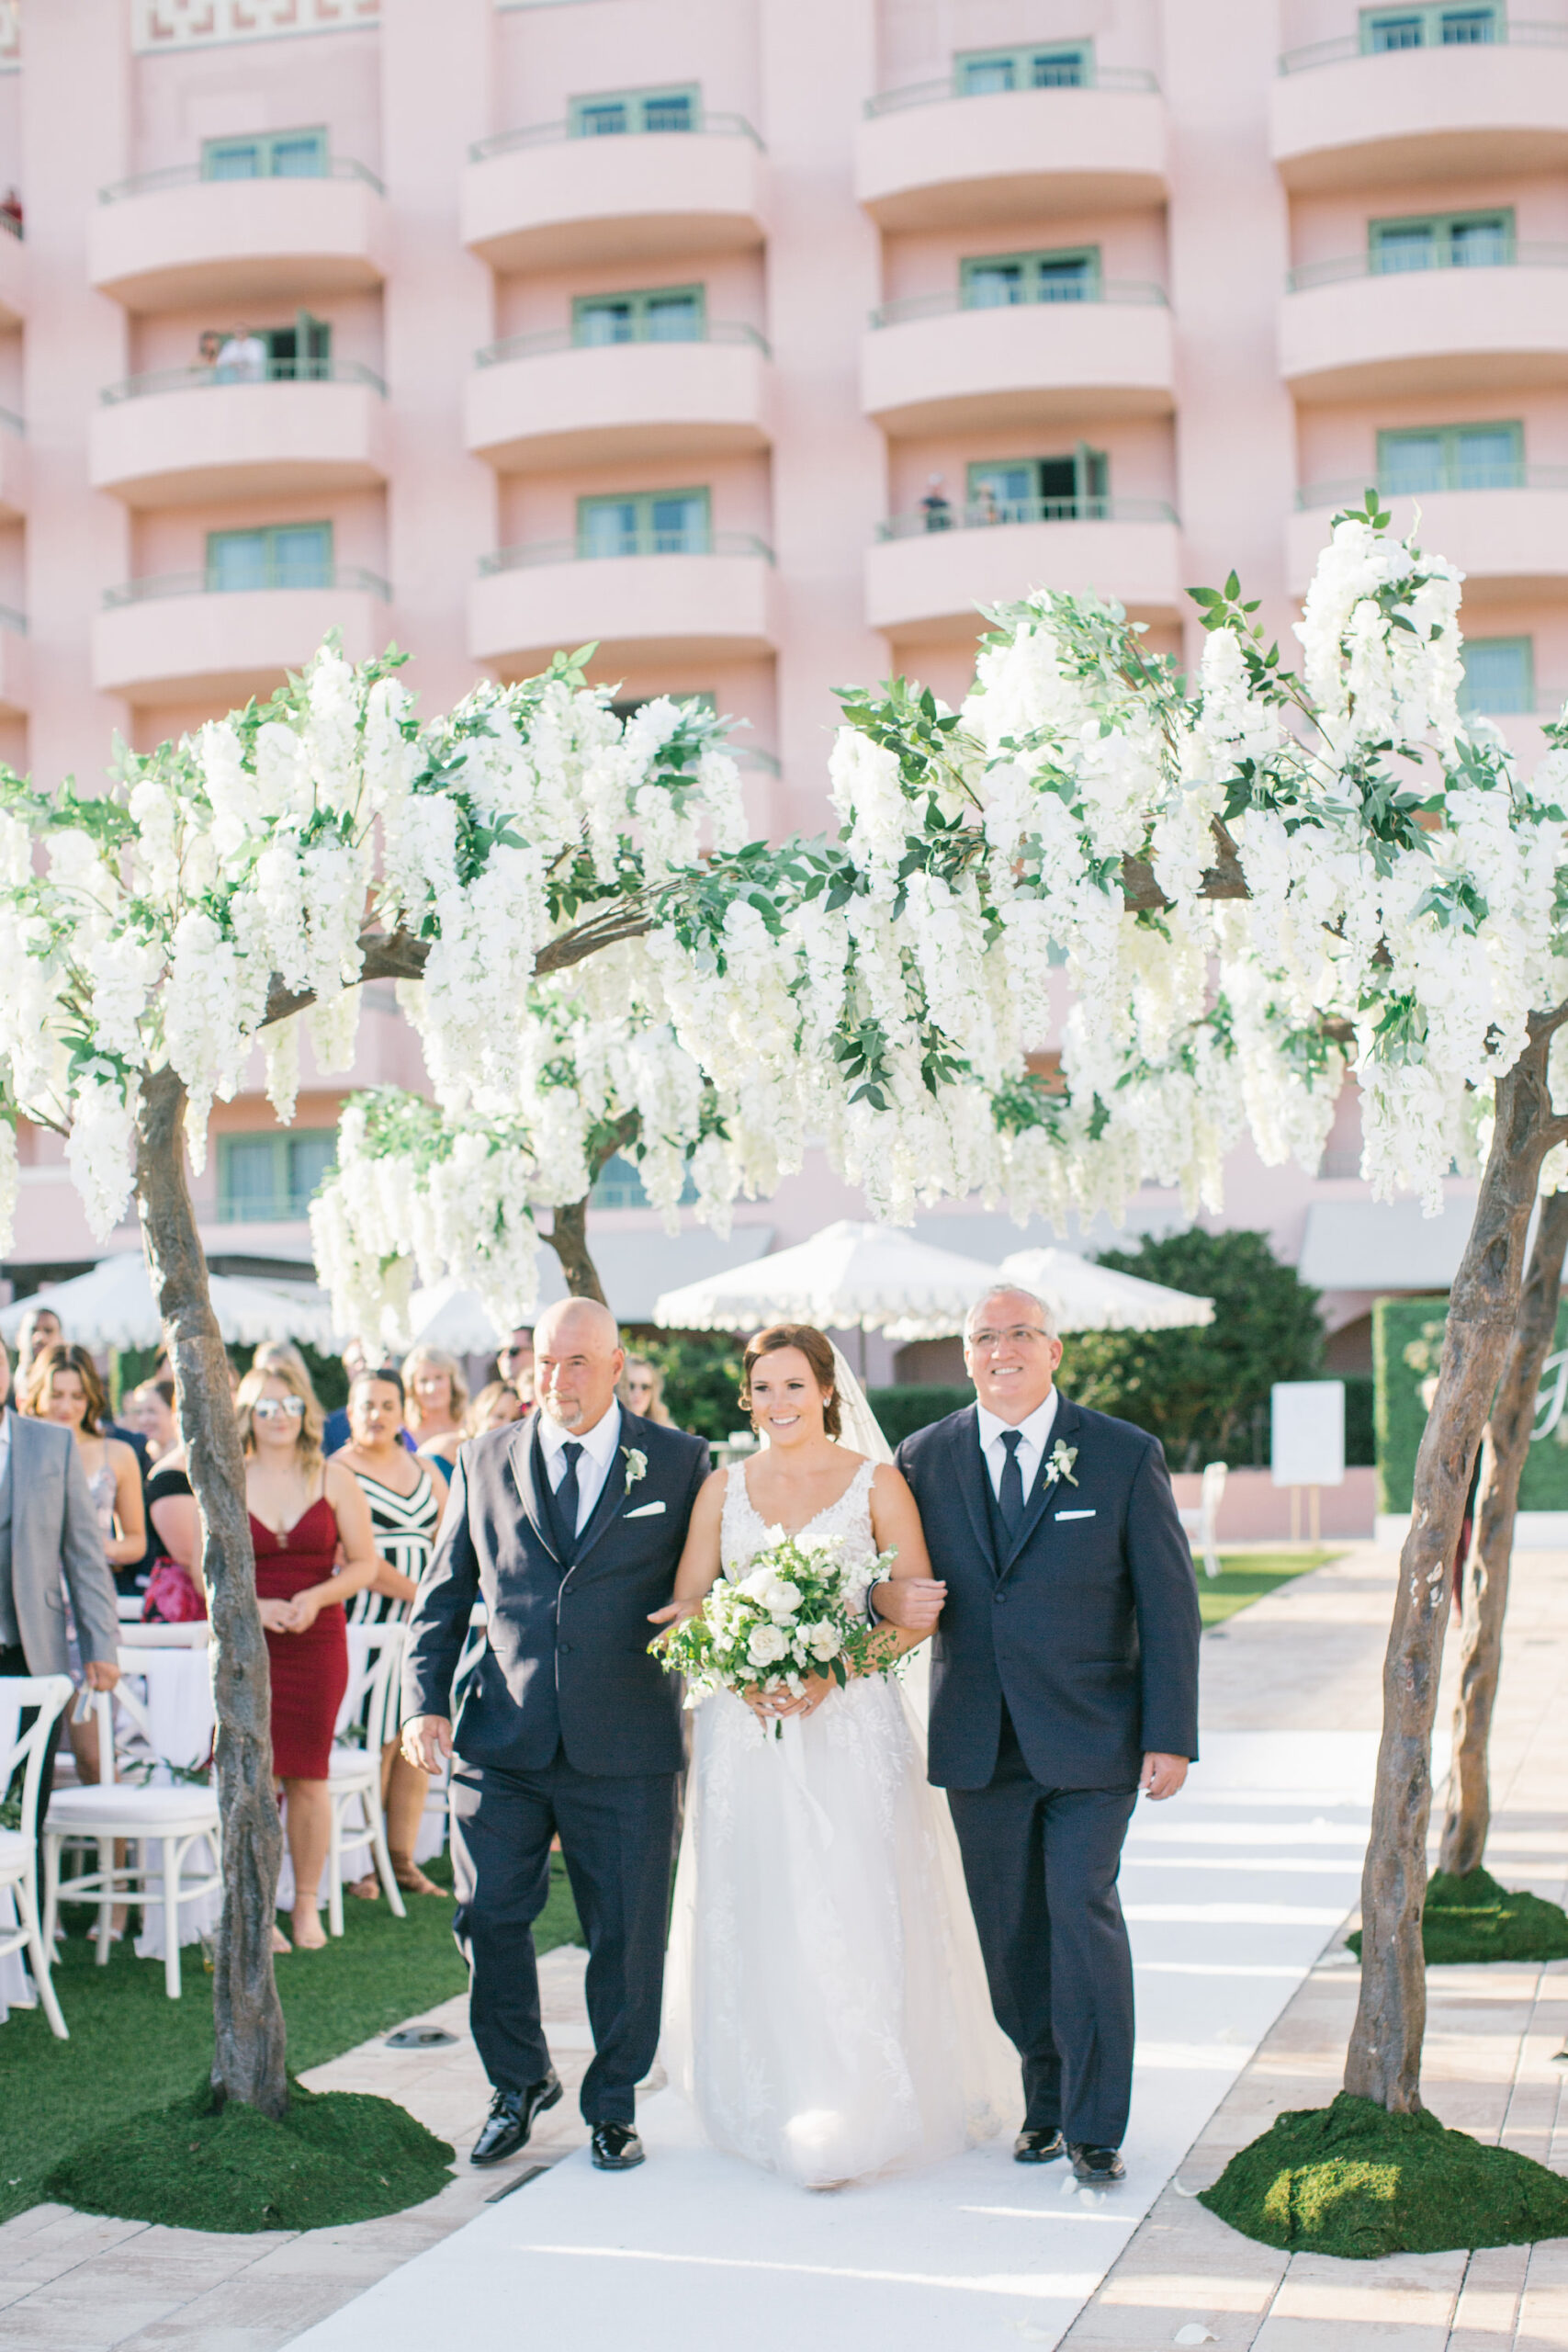 Bride and Fathers Walking Down Aisle | White Aisle Runner Inspiration | Tall Wisteria Tree Decor | Outdoor Beach Wedding Ceremony